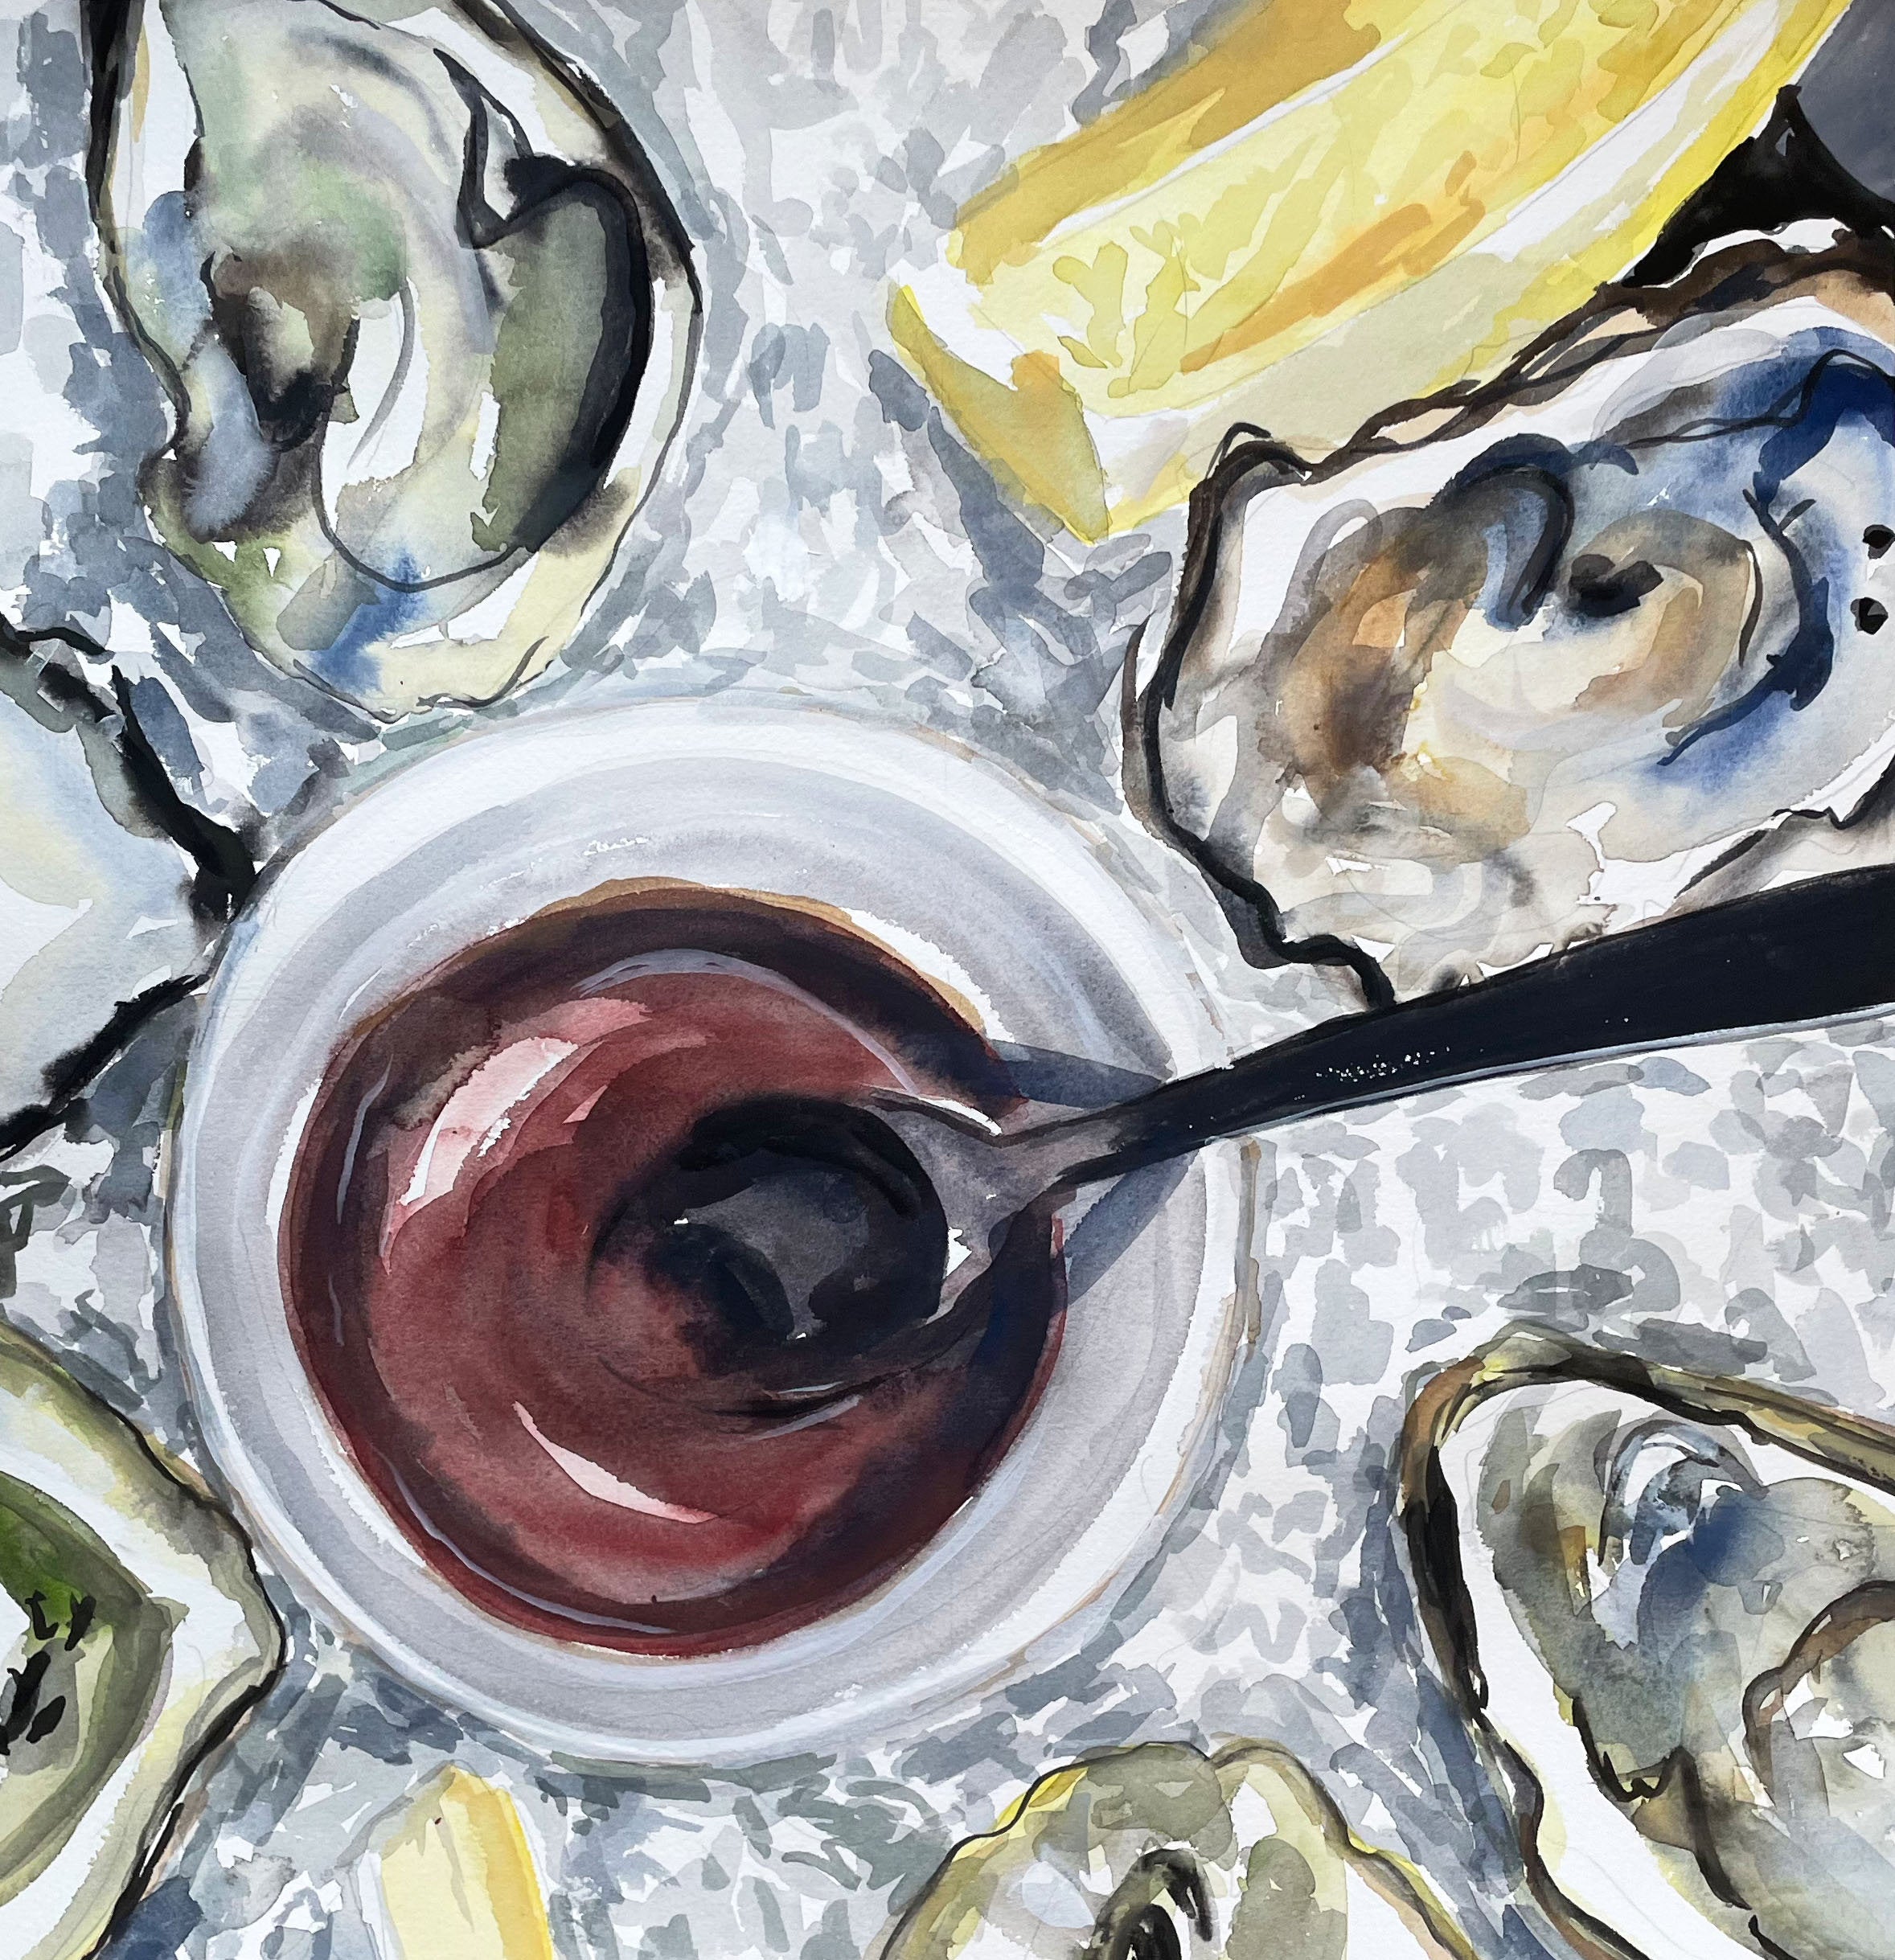 Oyster painting print of painting by Medjool Studio. Print of original gouache painting of an oyster meal, using grey, blue and yellow tones.